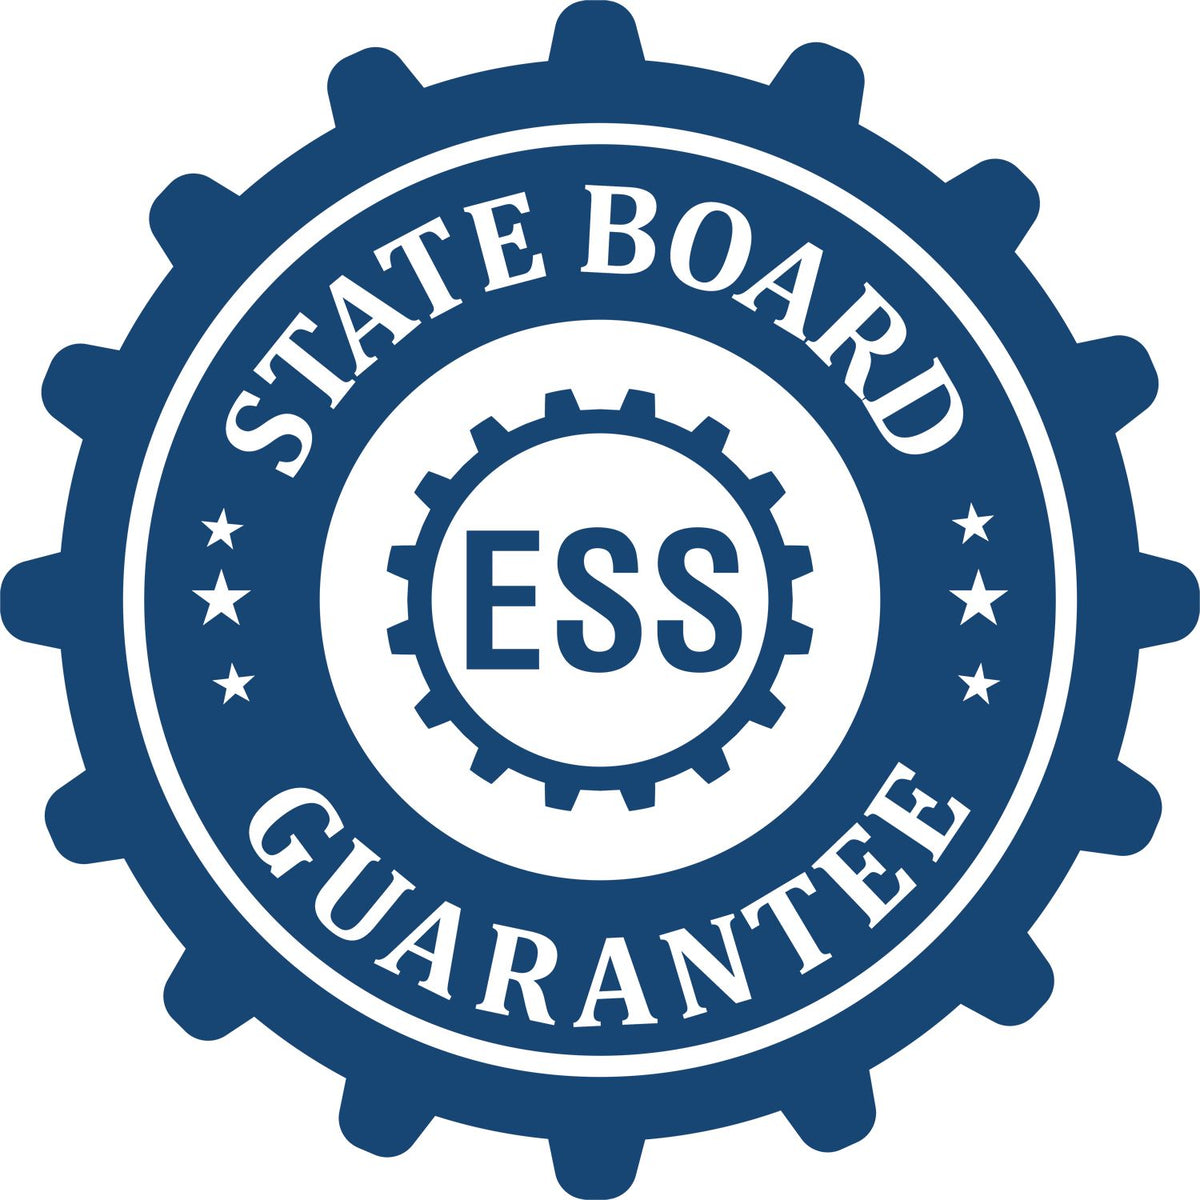 An emblem in a gear shape illustrating a state board guarantee for the State of New Mexico Extended Long Reach Engineer Seal product.